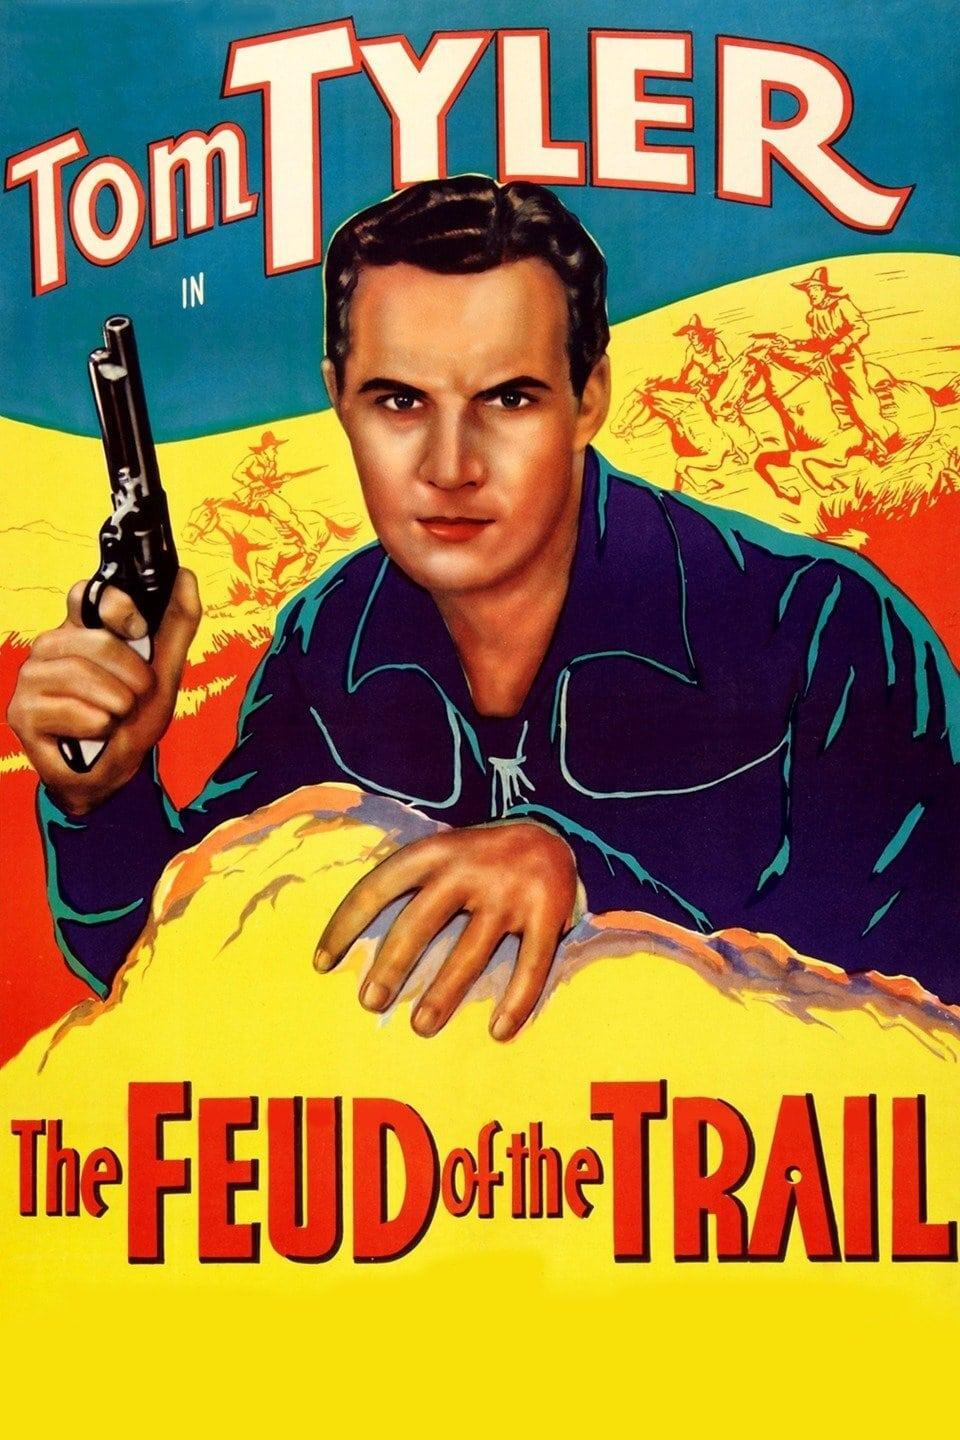 The Feud of the Trail poster